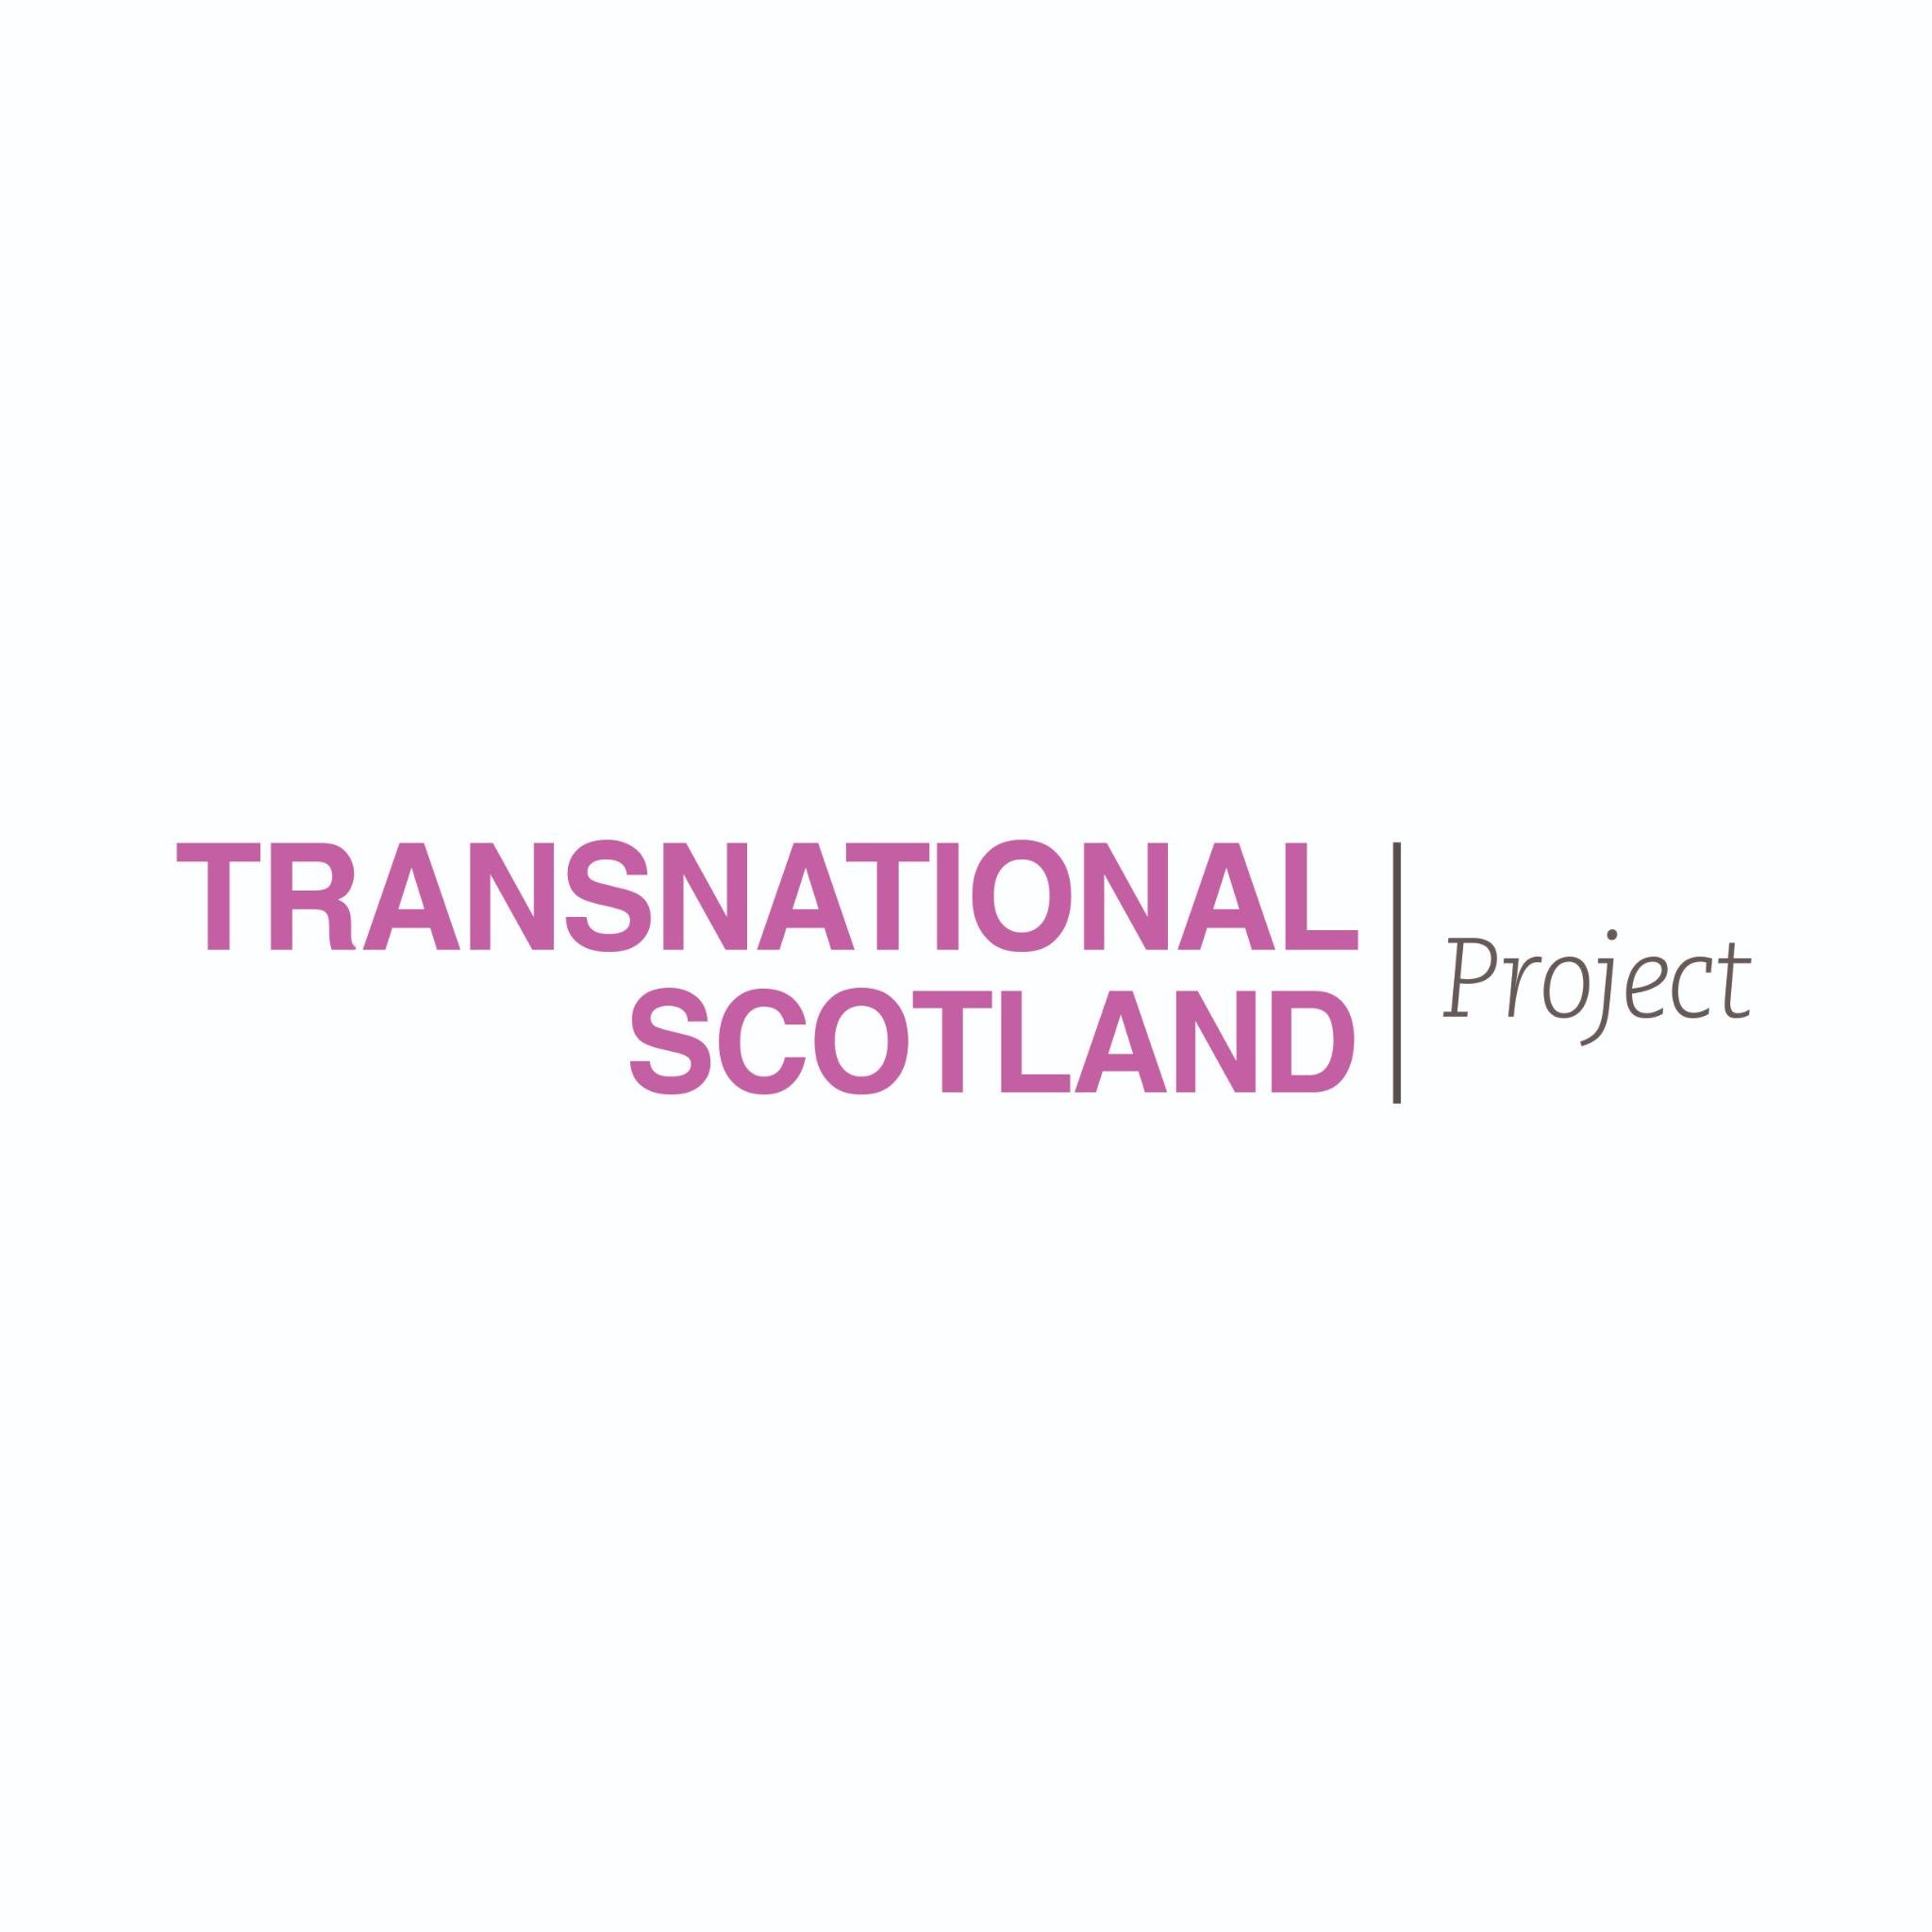 'Transnational Scotland' explores the transnational history of Scotland through the objects of its historical global trades in cotton, jute, sugar, and herring.